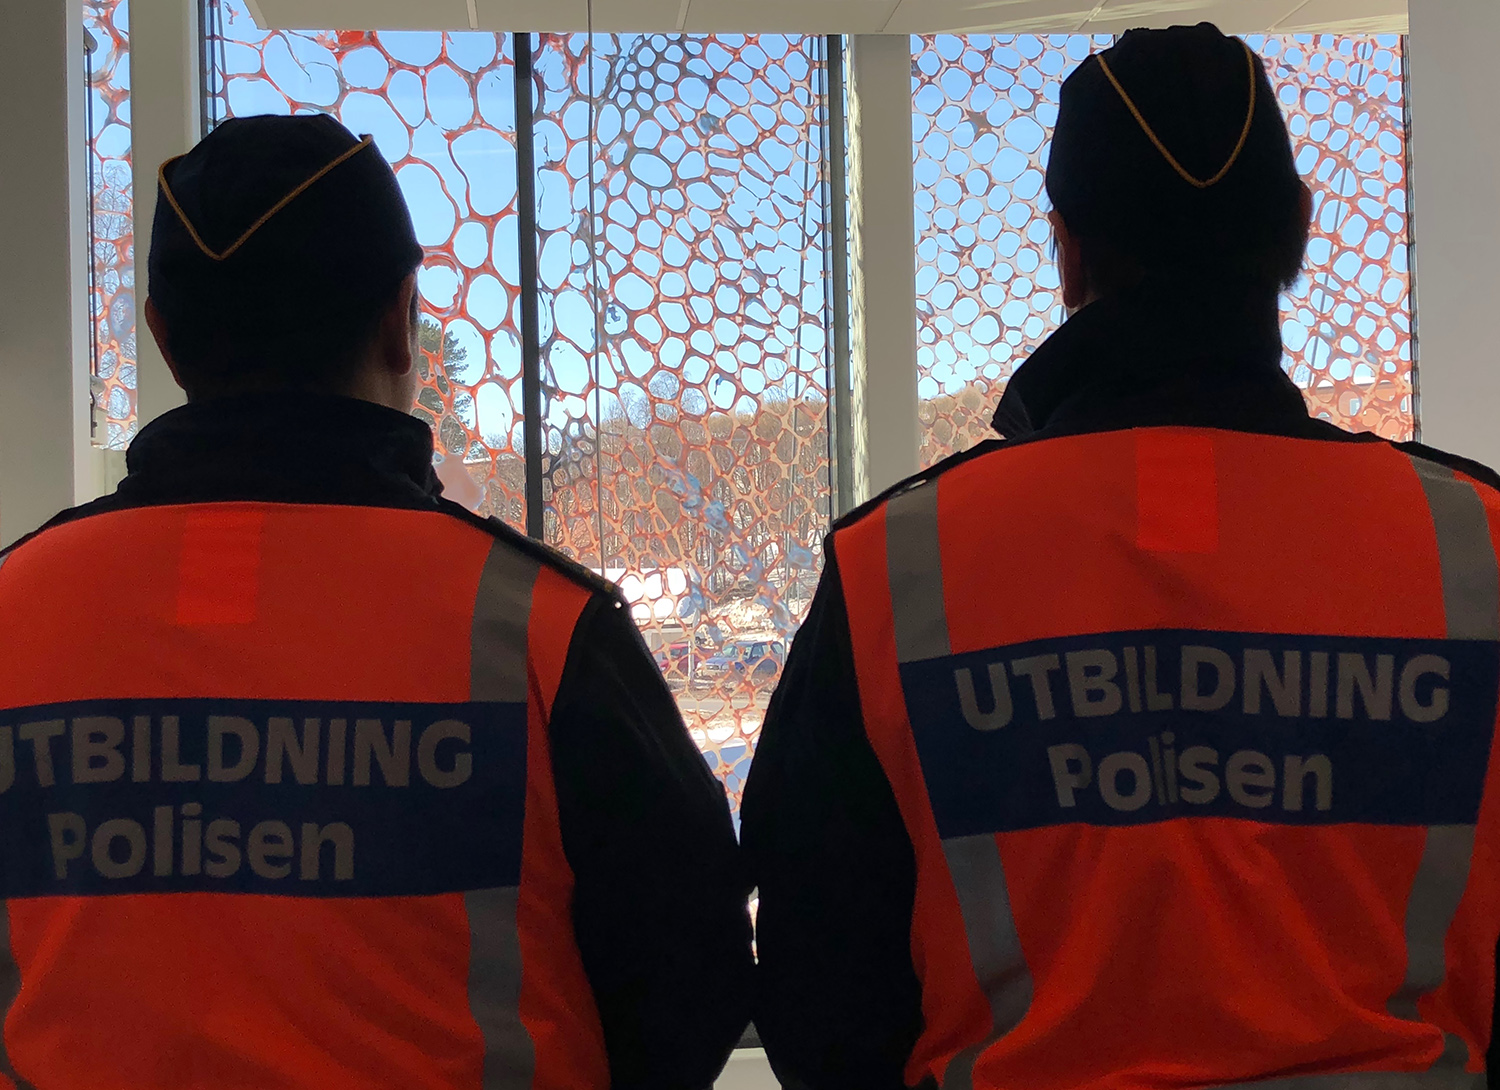 Two people with orange vests are looking at the artwork from the inside.